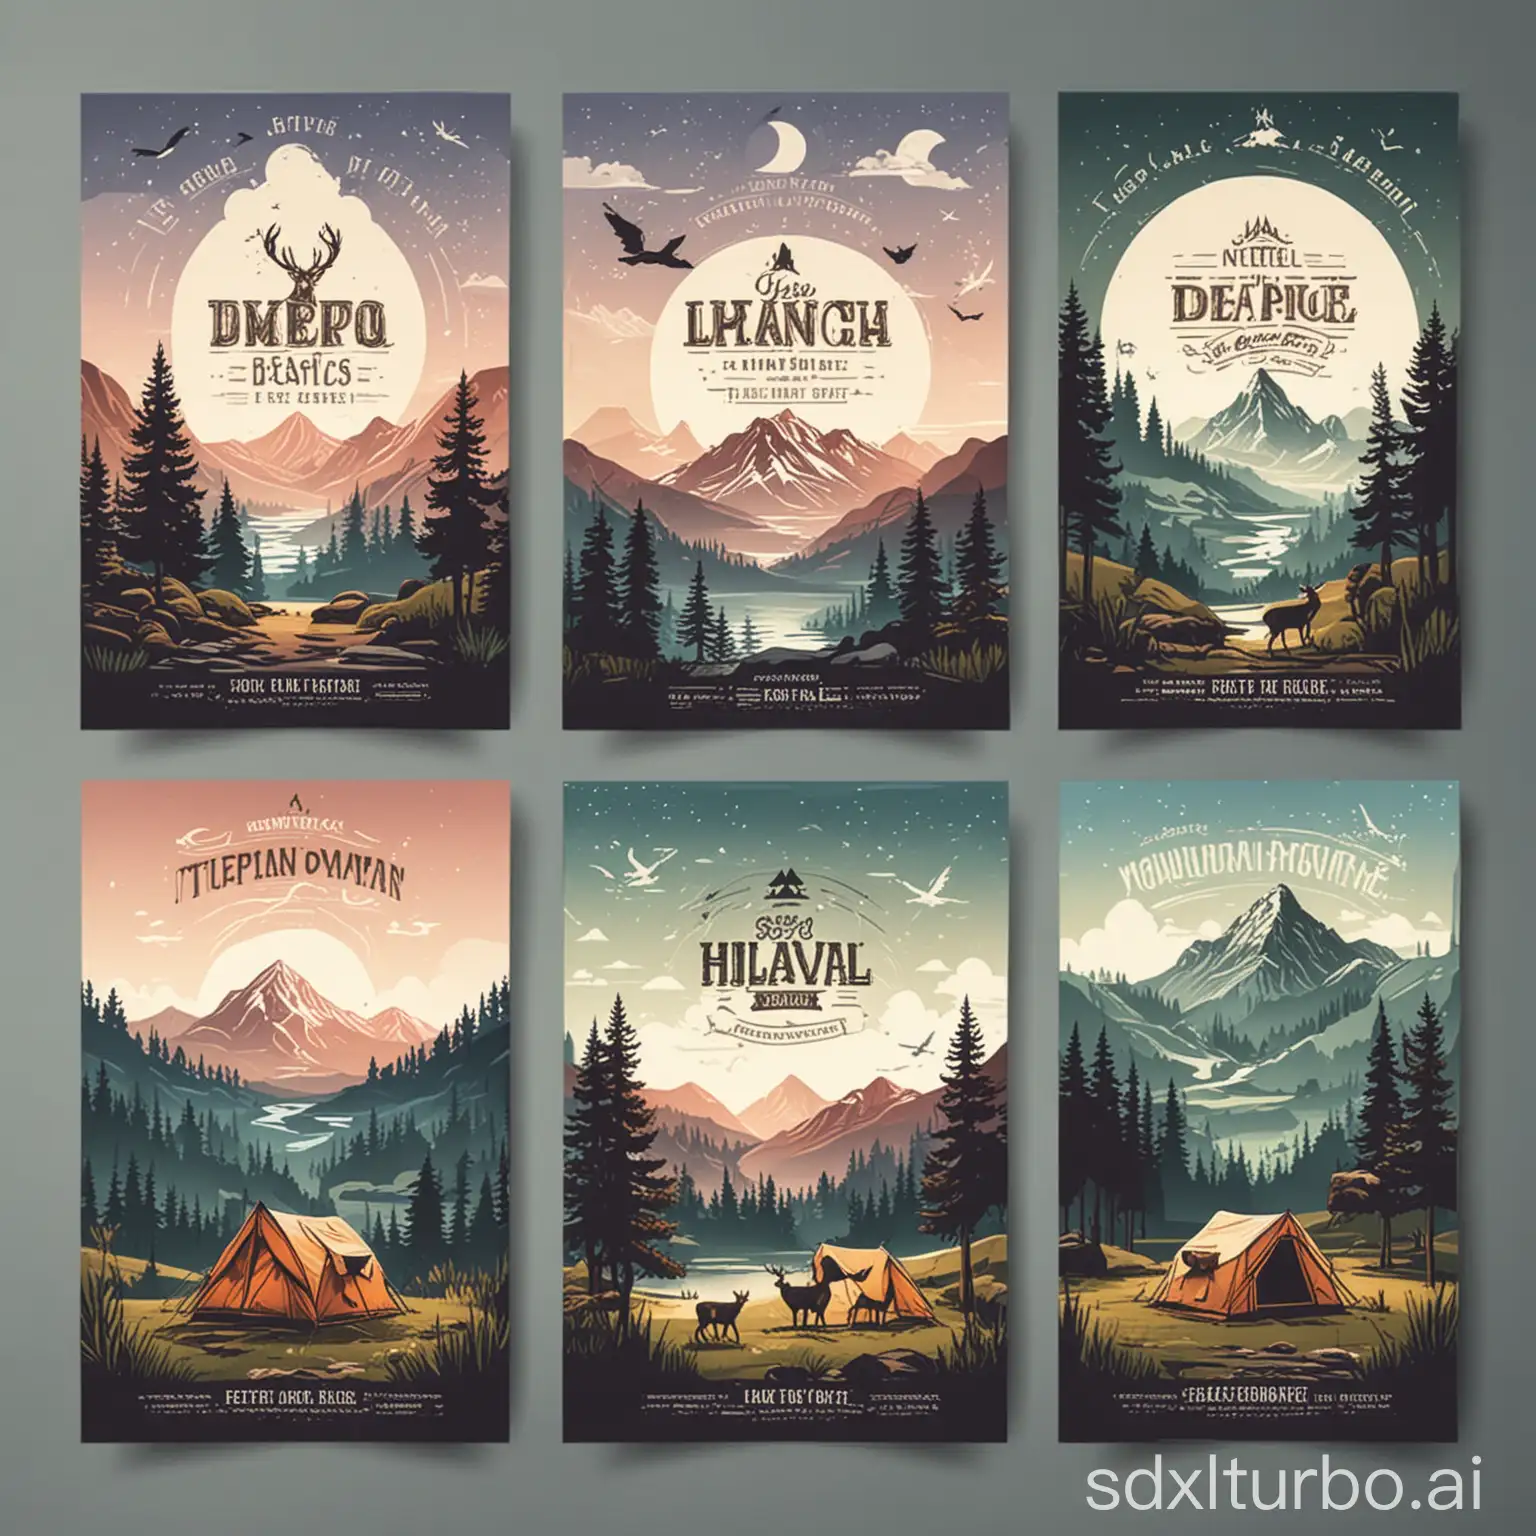 Vector illustration. Flyer, brochure, banner template design with travel inspirational quotes, landscape, deer, camping tent, forest and mountain silhouette